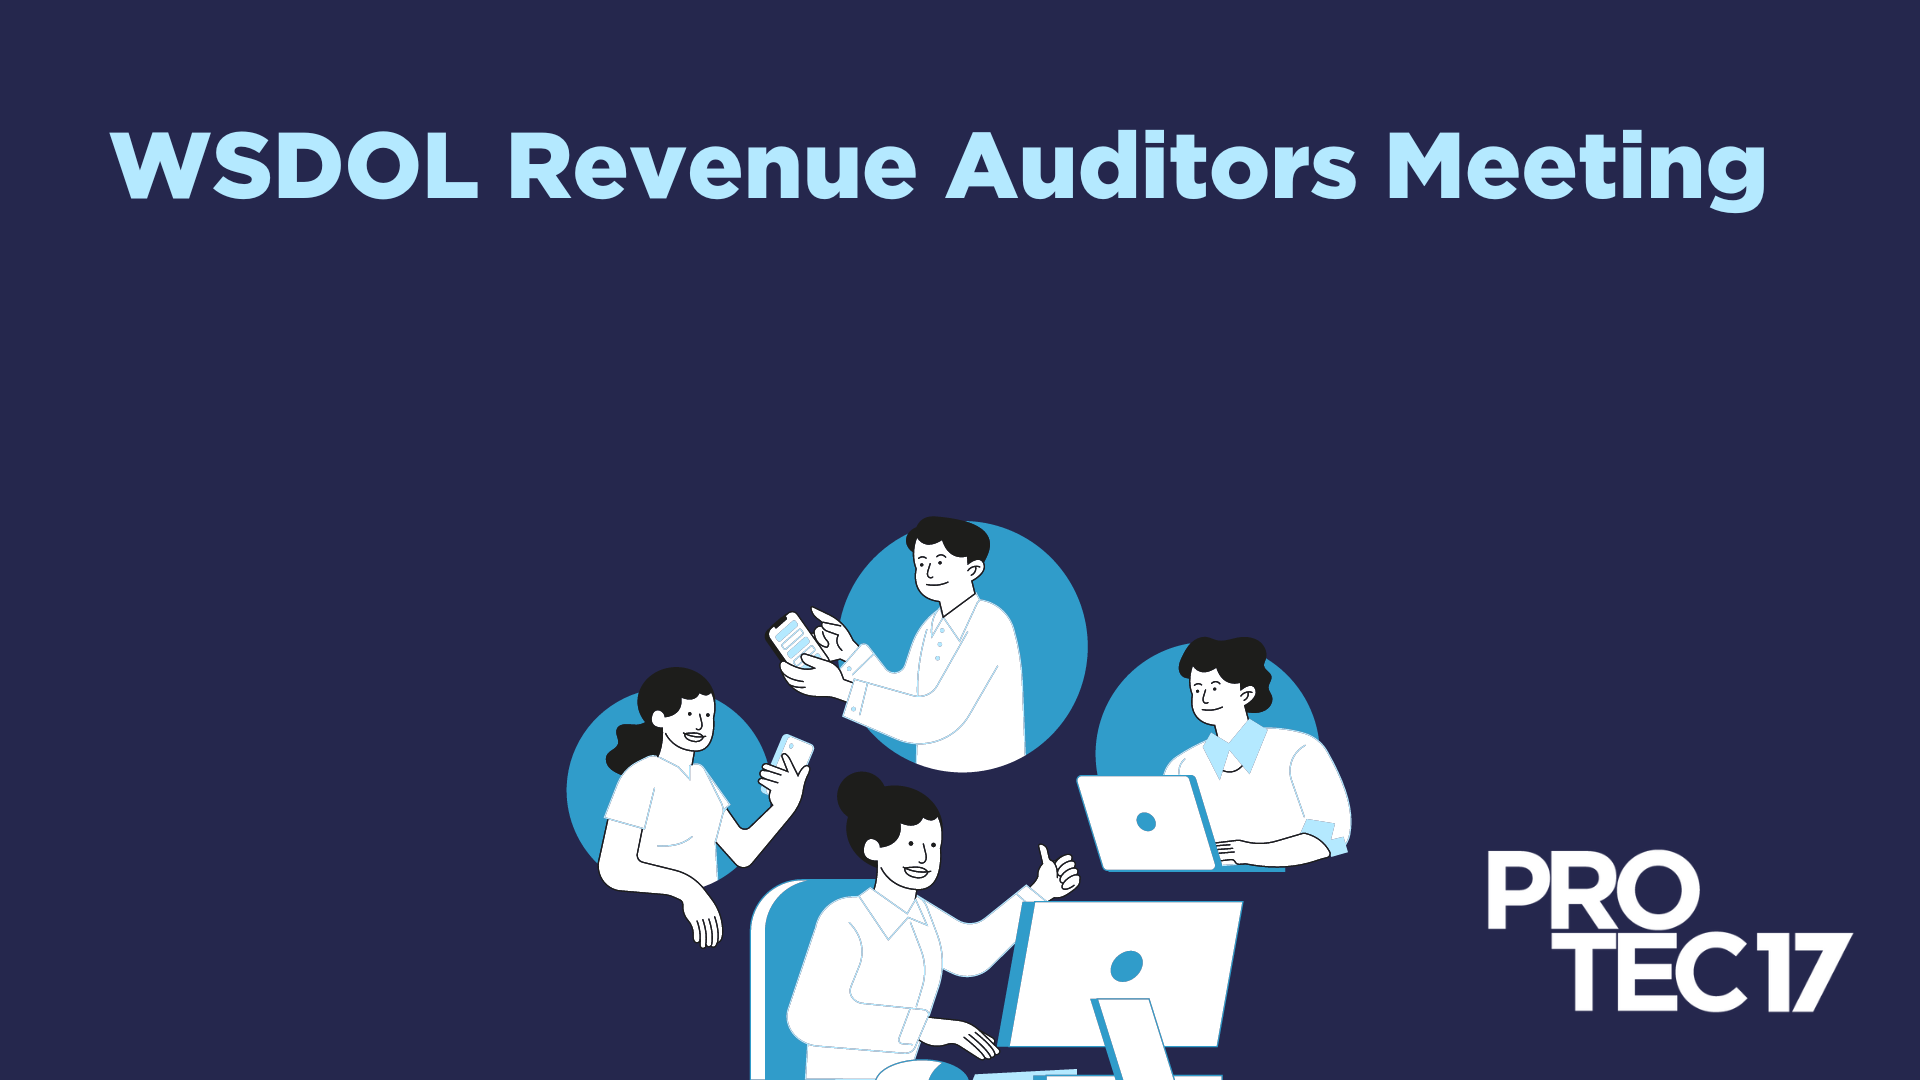 On a dark blue background, the text reads, "WSDOL Revenue Auditors Meeting." There is a colorful illustration of different shades of blue and white, showing people meeting virtually. The PROTEC17 logo is in the bottom right.